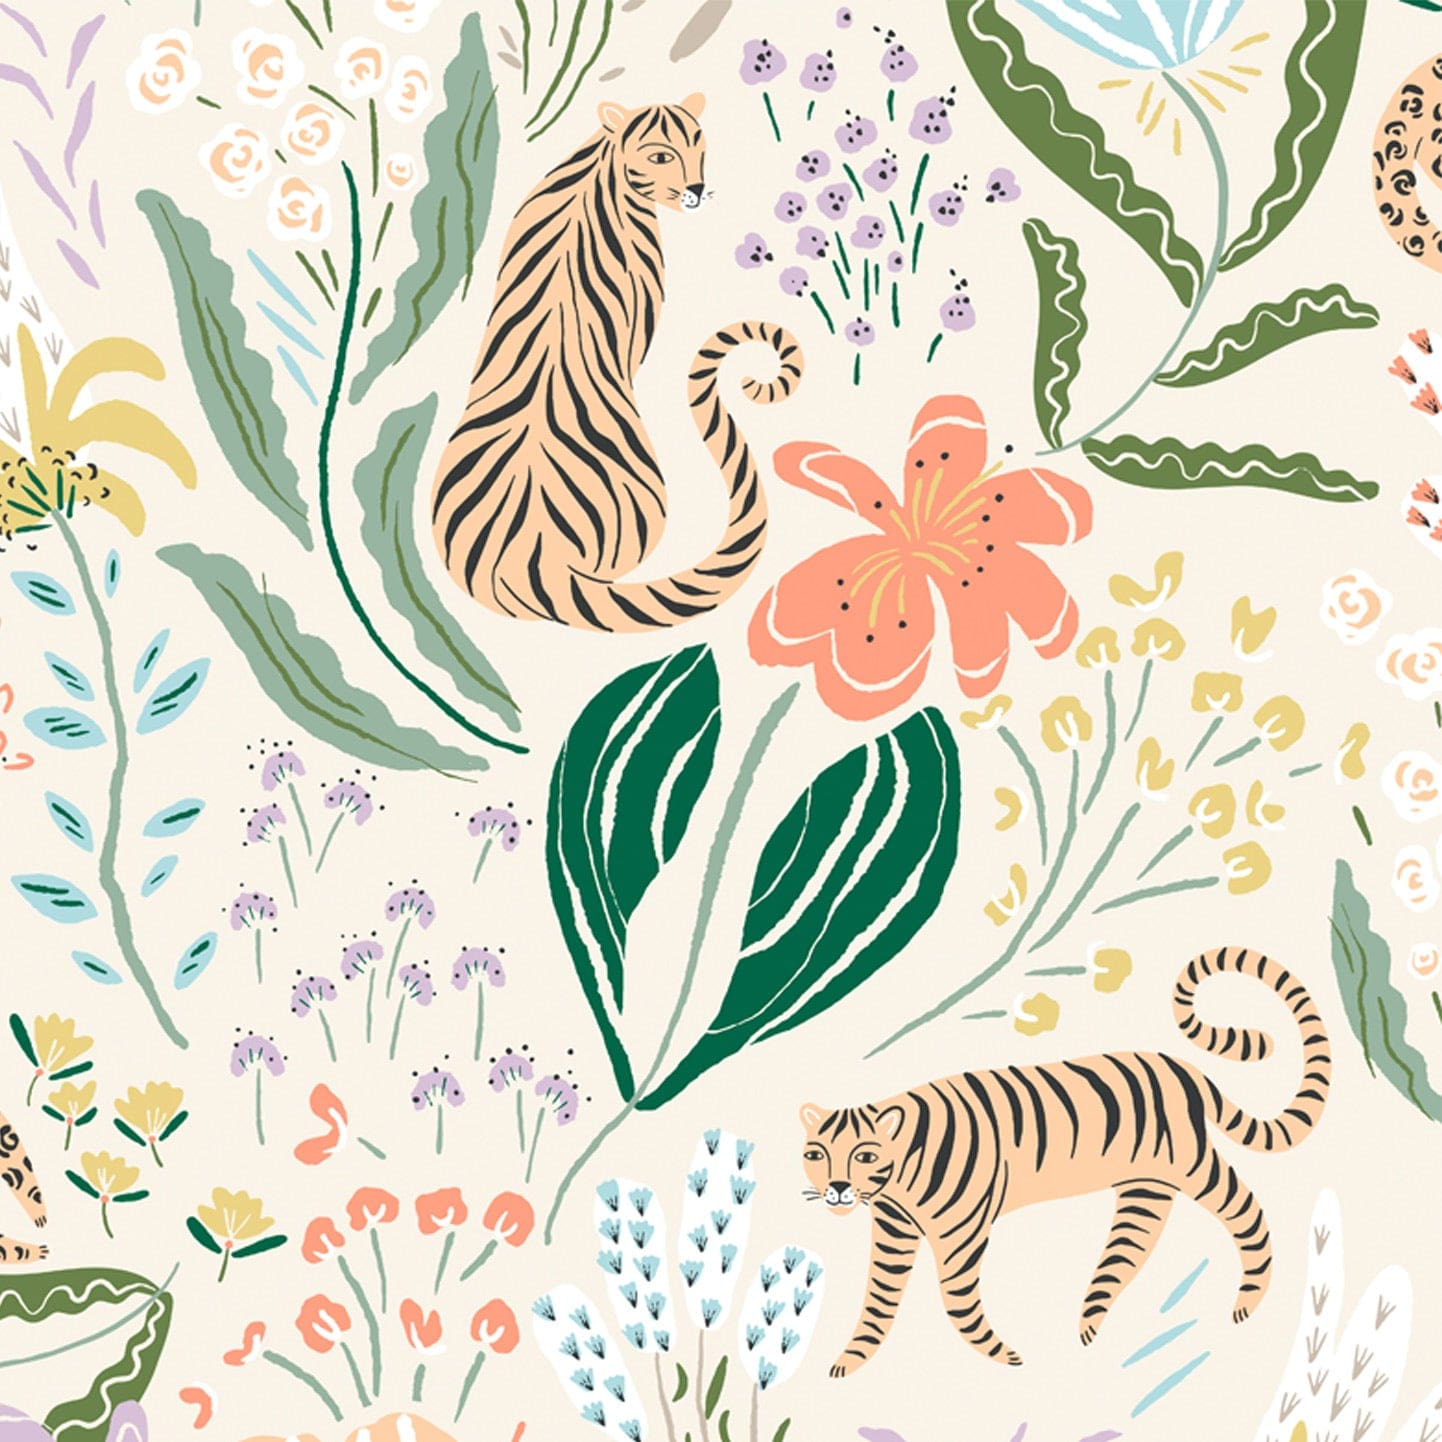 Wallpaper sample of leopards and tigers surrounded by pastel flowers and exotic green leaves. 